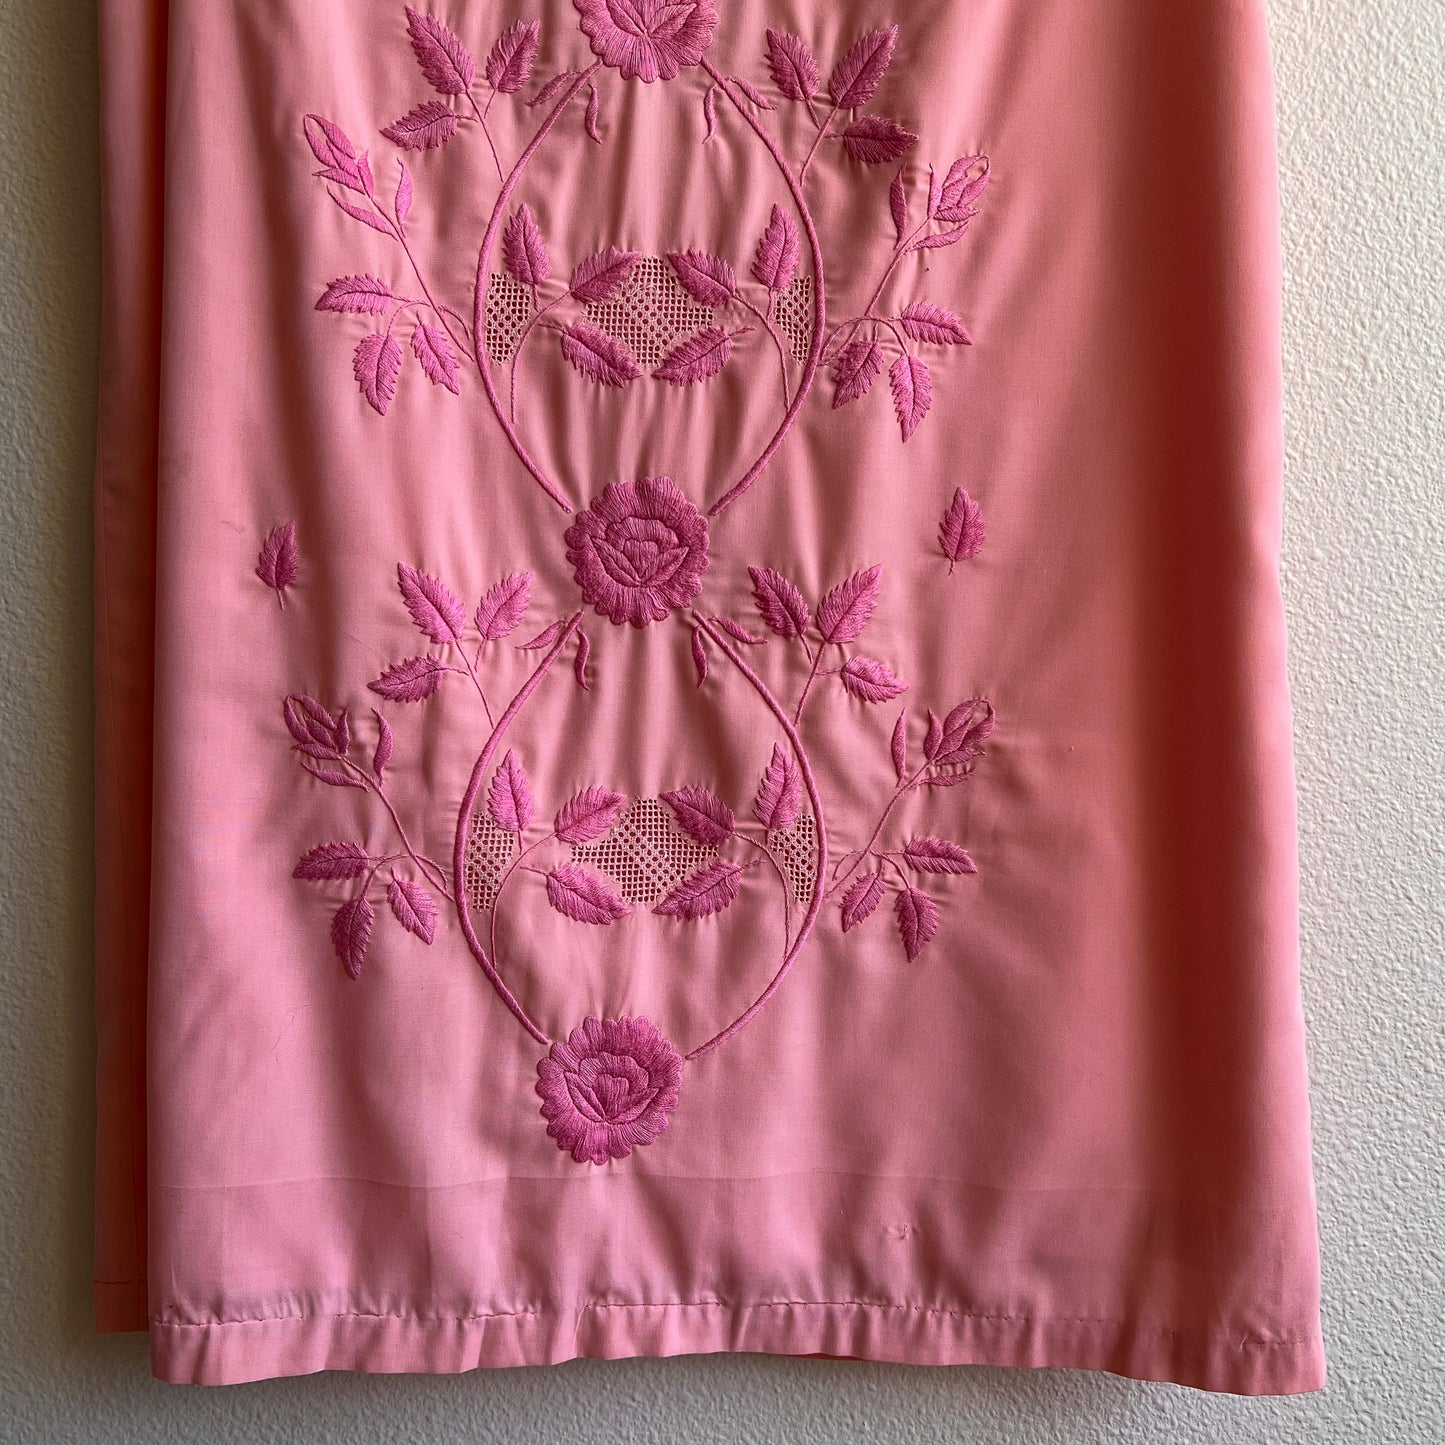 1960s Pink Floral Embroidery Shift Dress (L/XL)